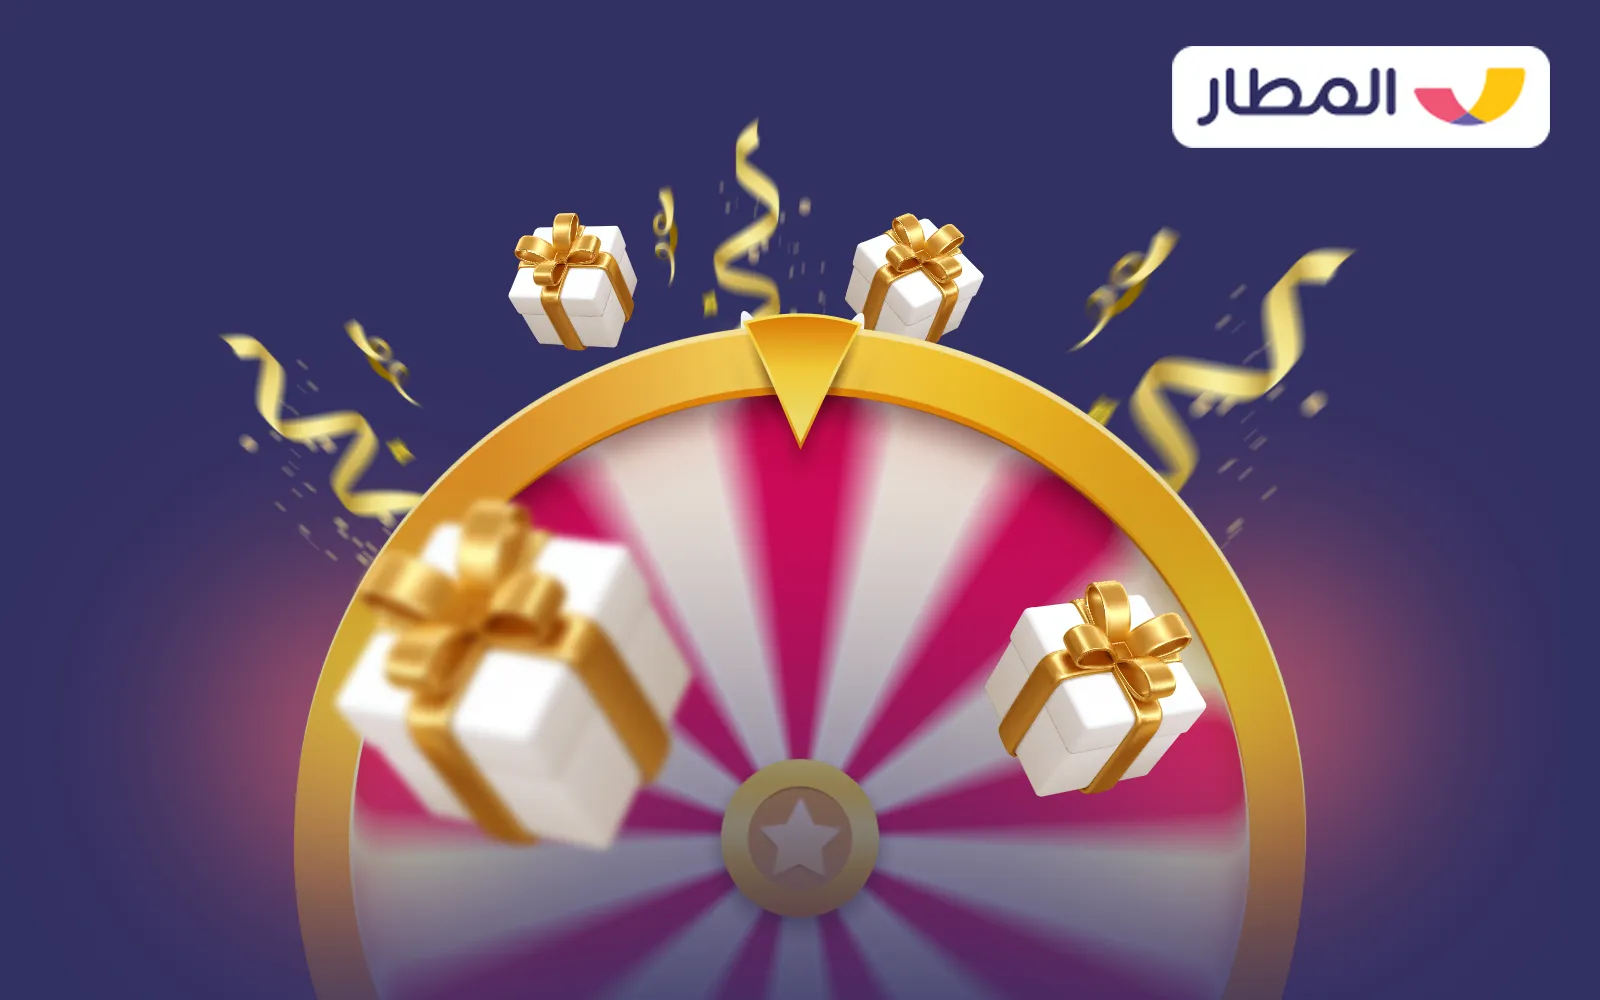 Almatar week and endless surprises with customers